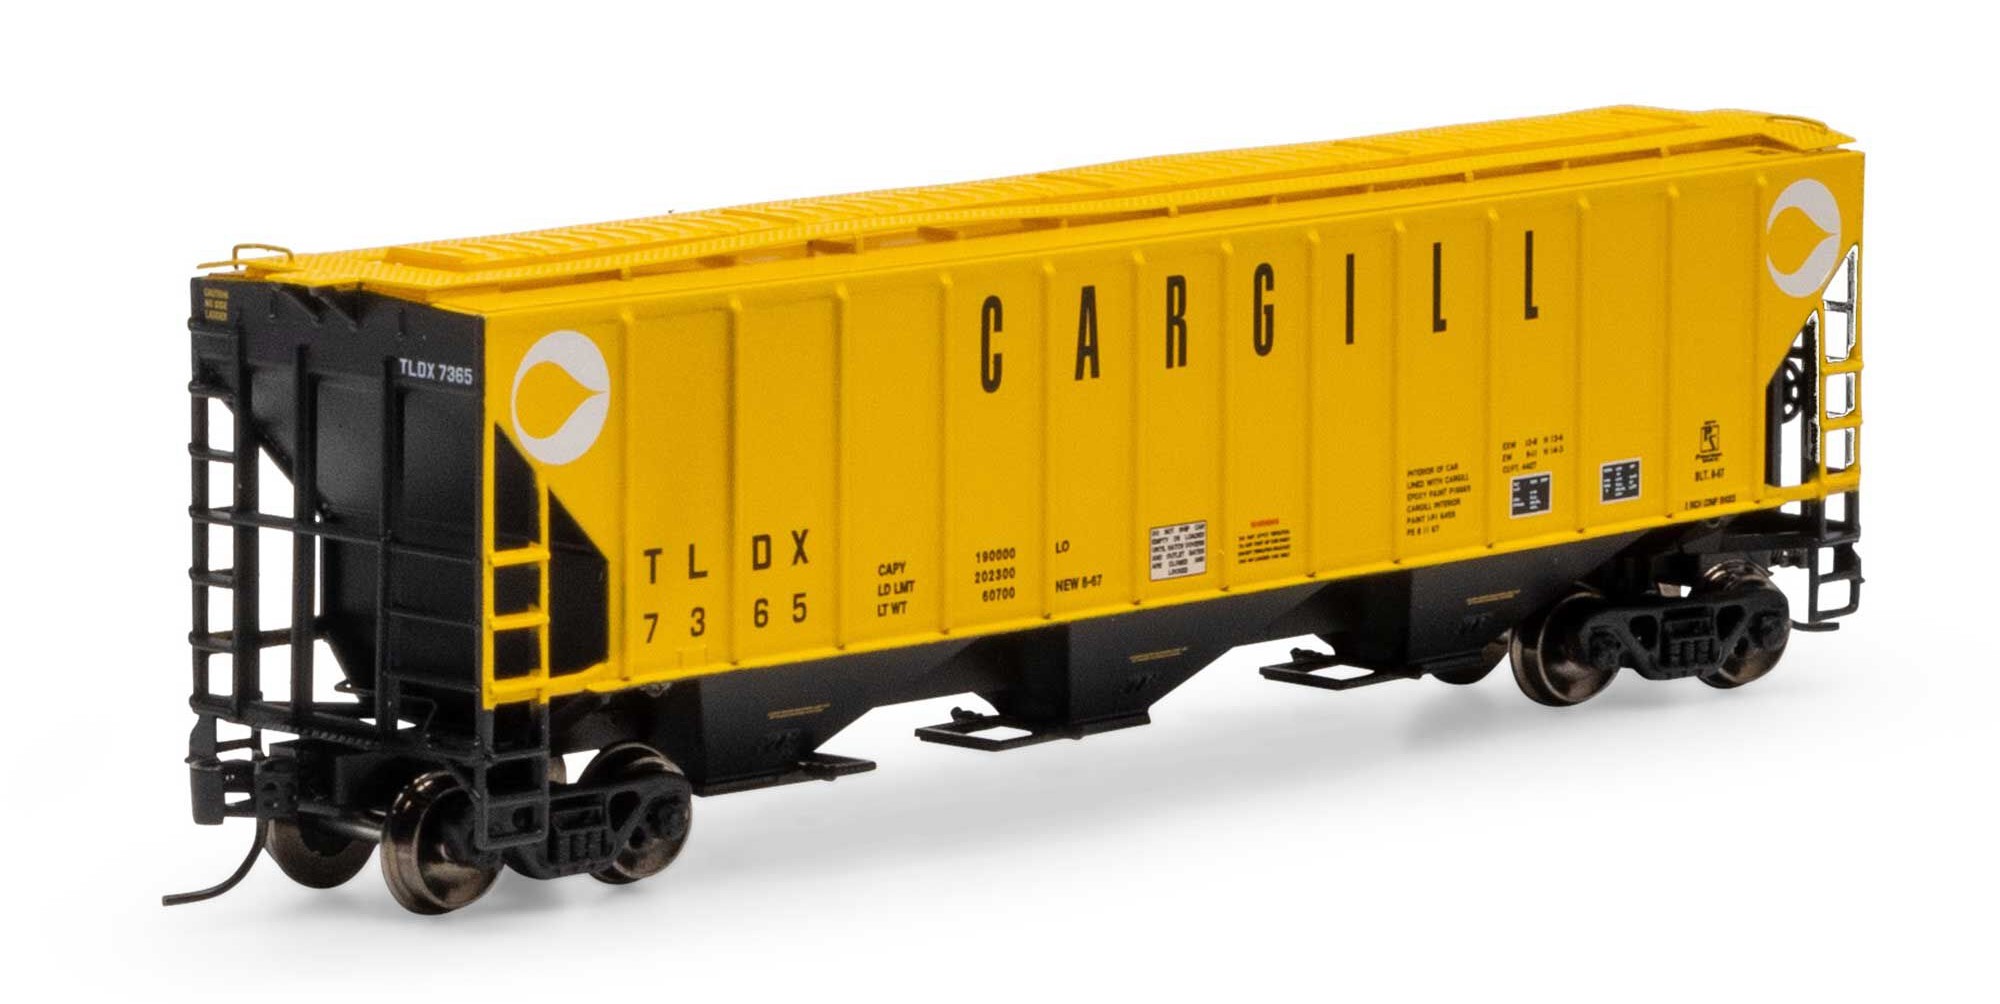 Athearn N ATH27402 PS 4427 Covered Hopper Cargill TLDX #7365